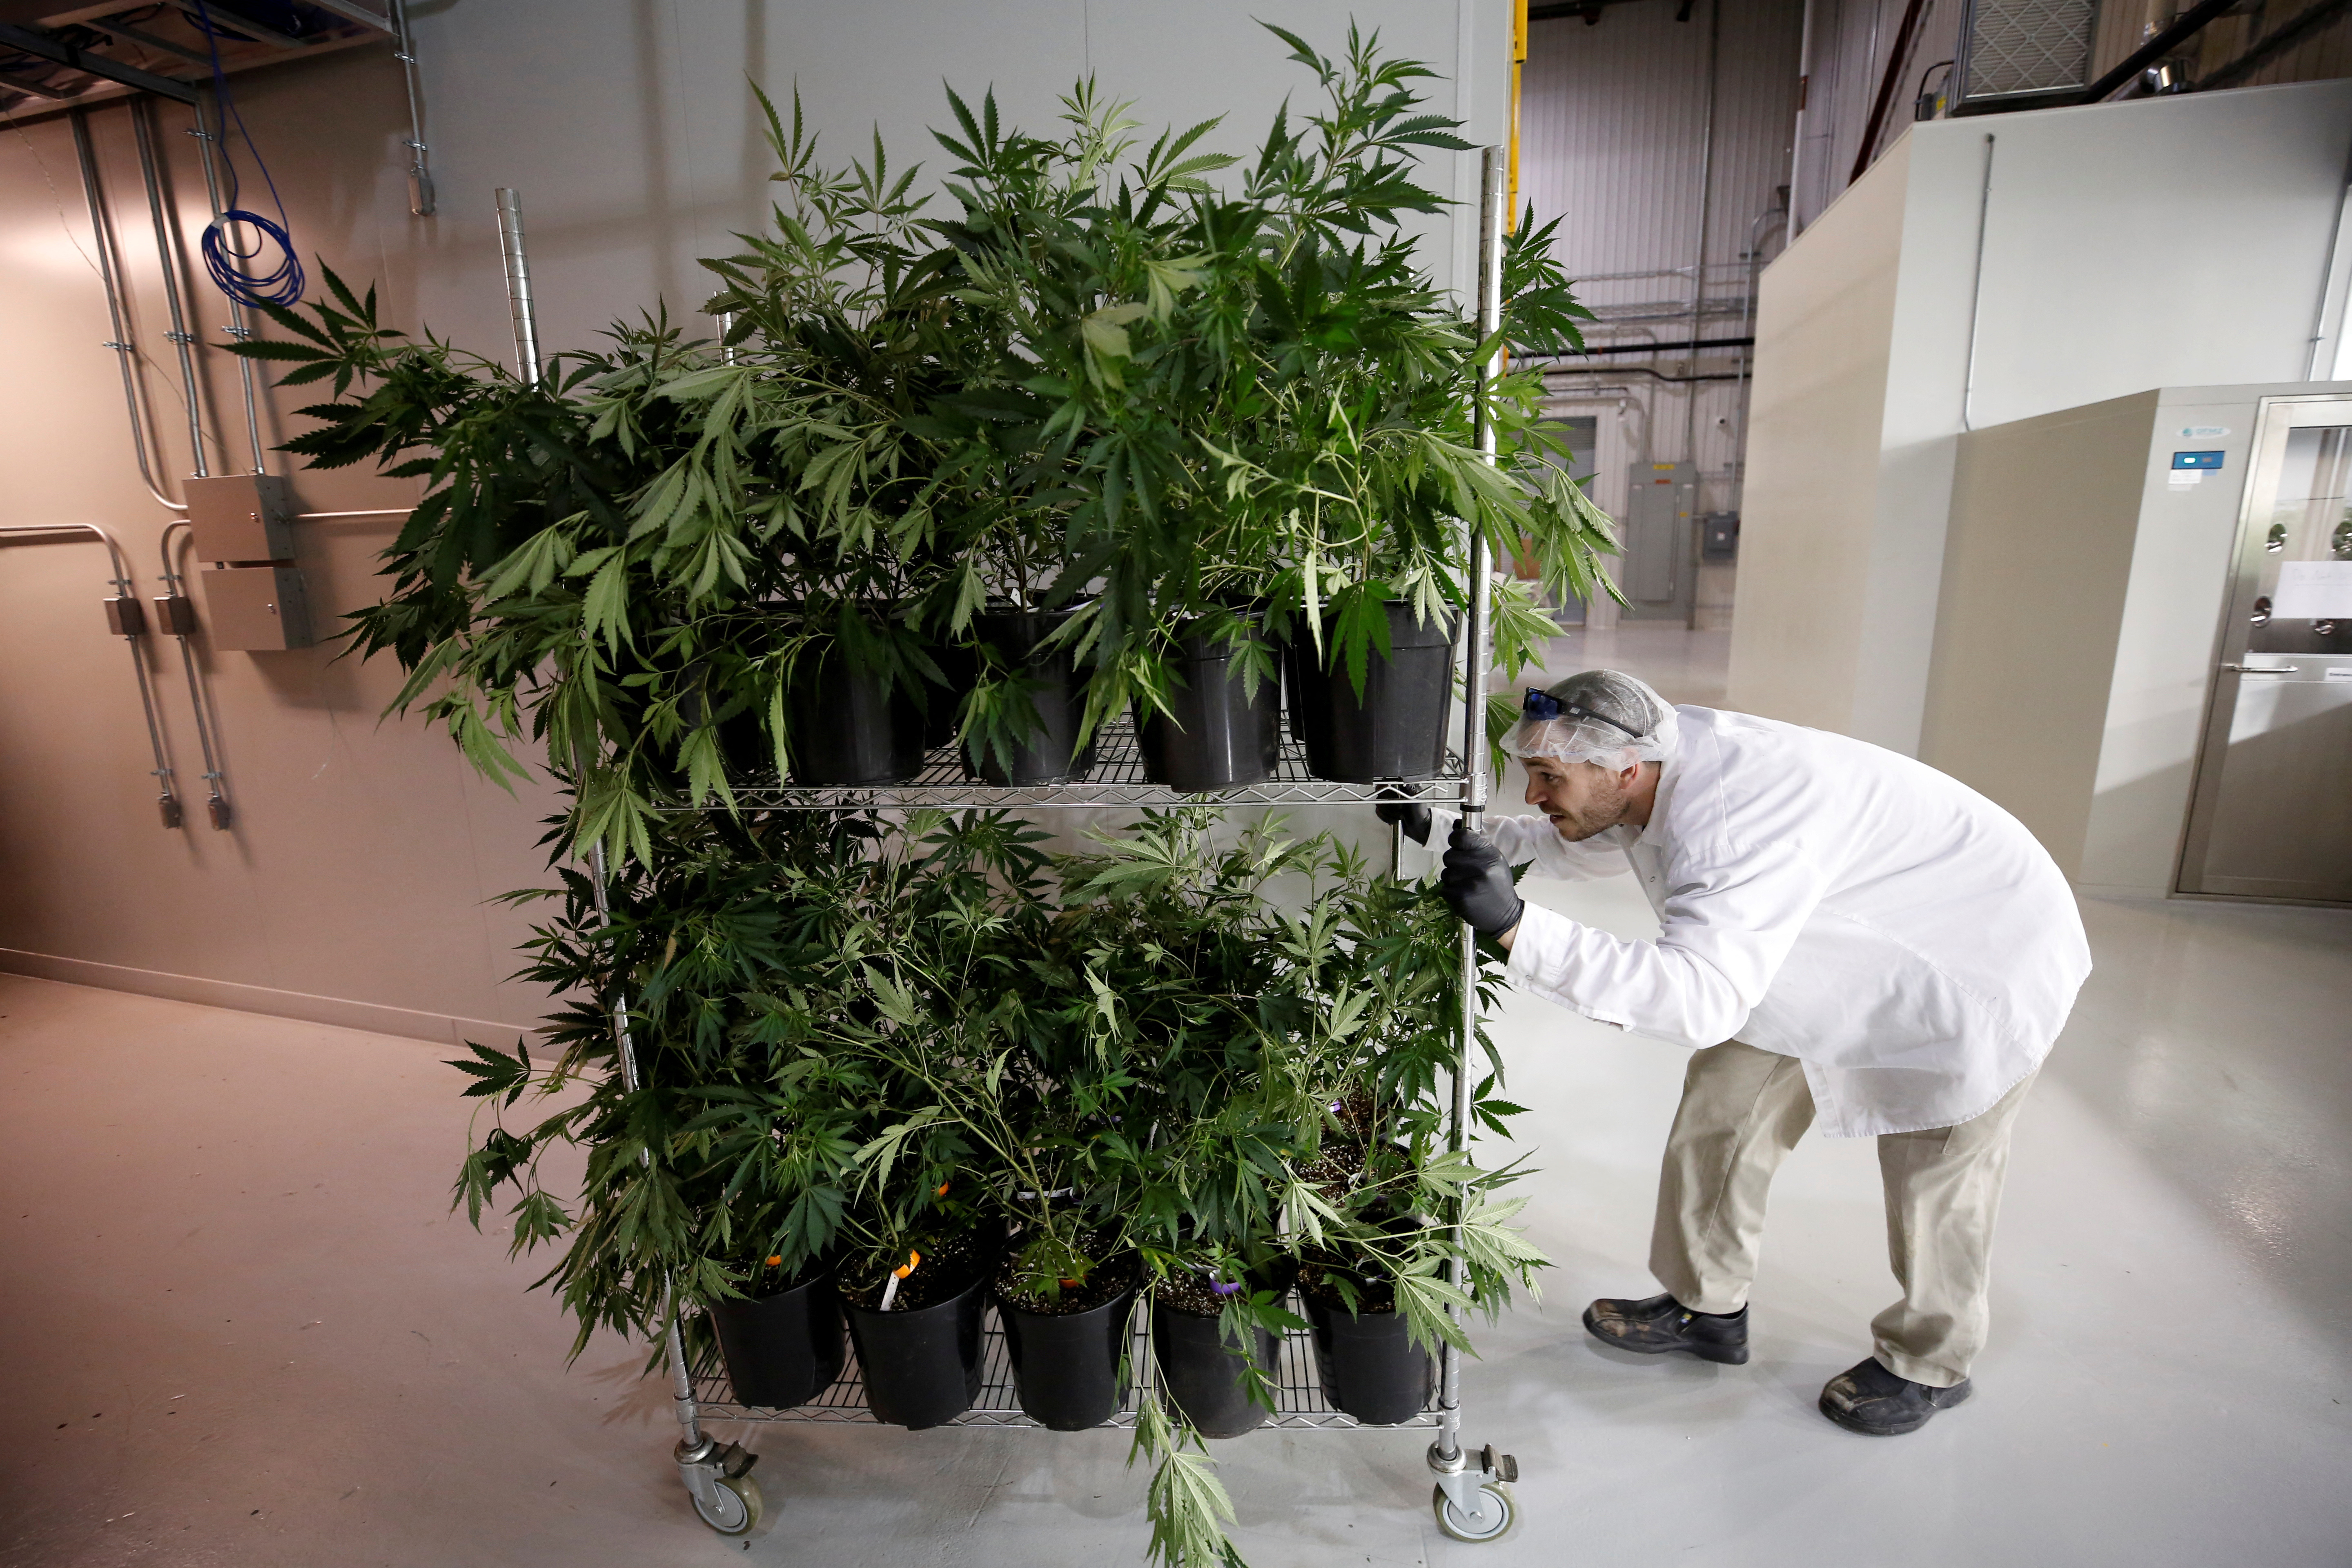 A worker pushes a cart of marijuana plants at the Canopy Growth Corporation facility in Smiths Falls